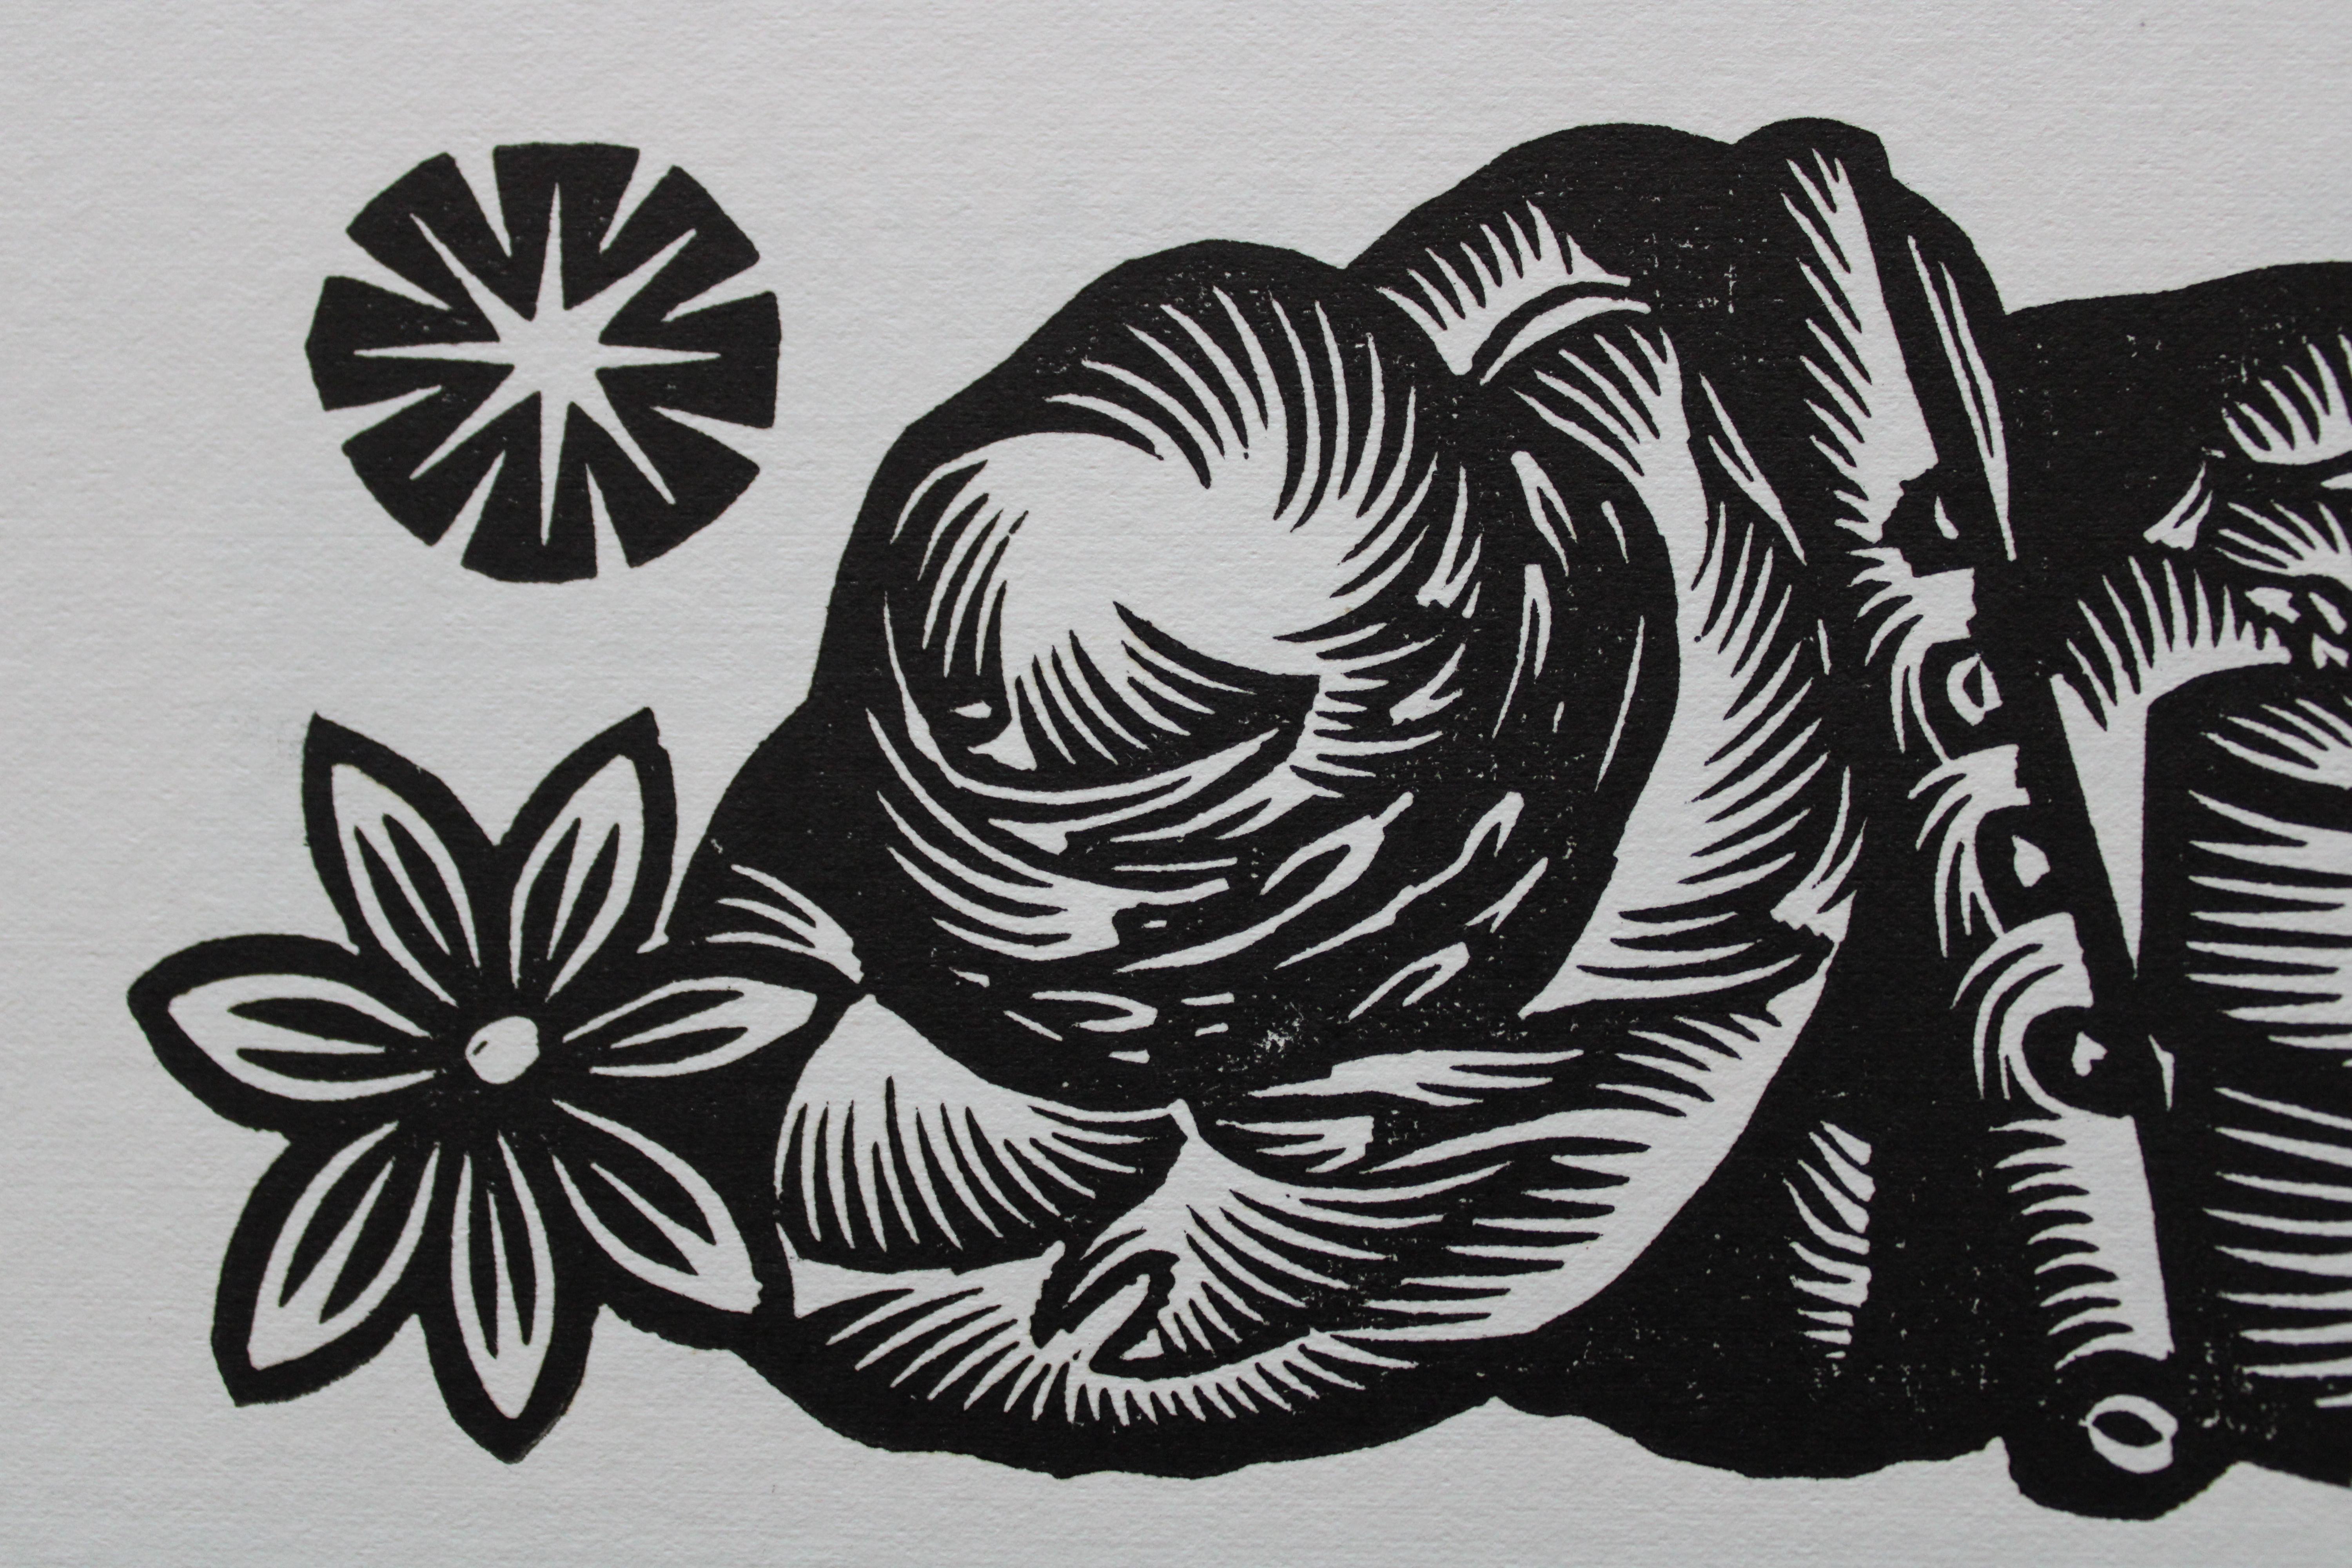 Joys, sorrows and difficulties of herdsman. 1979. Paper, linocut, 19x33 cm - Print by Dainis Rozkalns